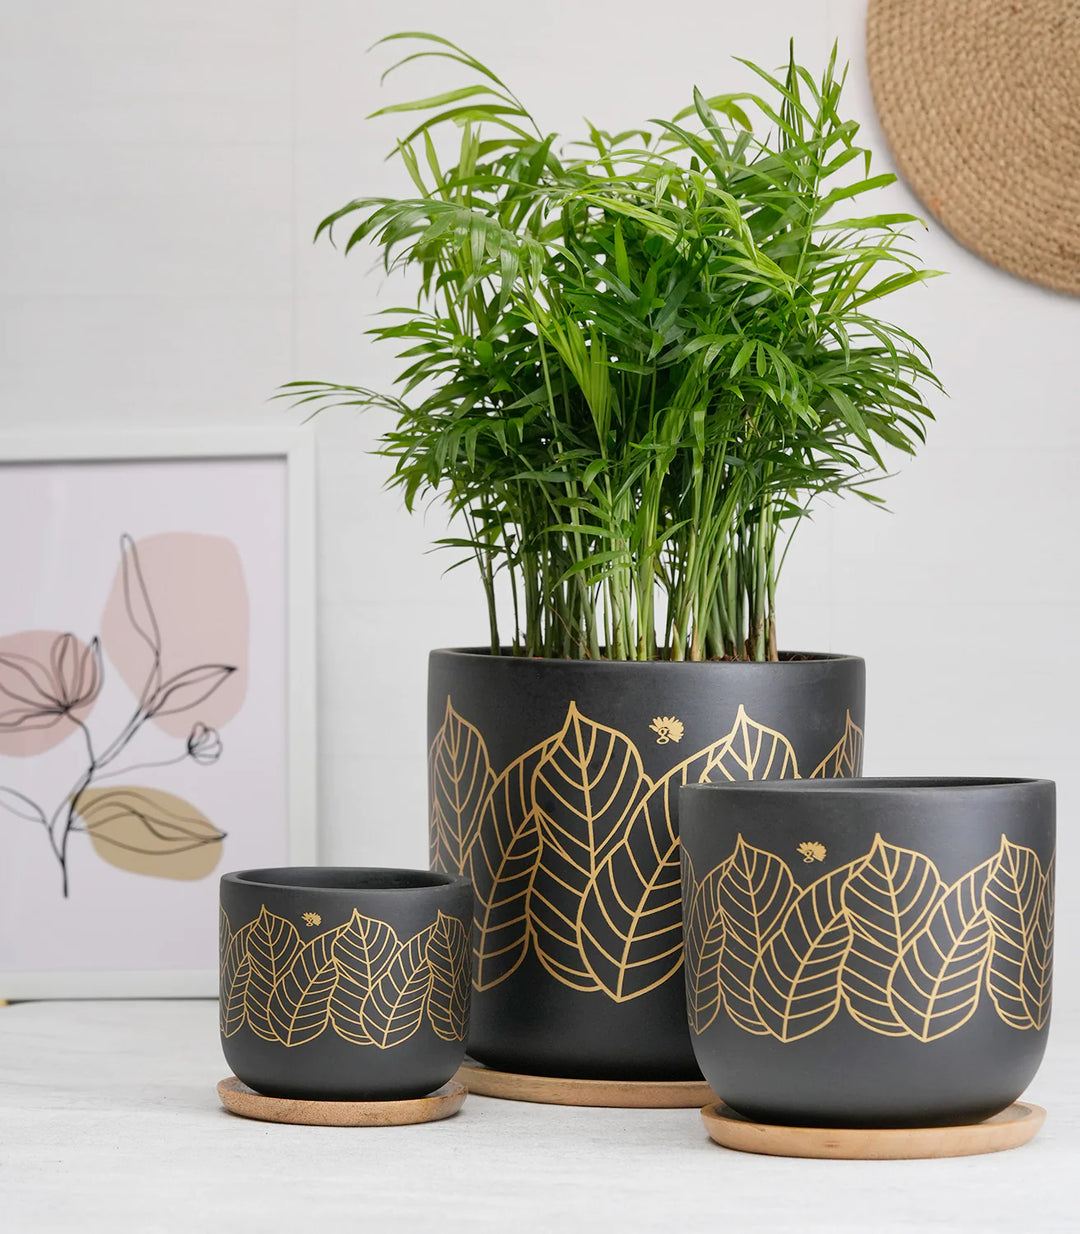 Terracotta Plant Pots Combo with Wooden Tray | Zen' Black Terracotta Plant Pots Combo with Wooden Bottom Tray